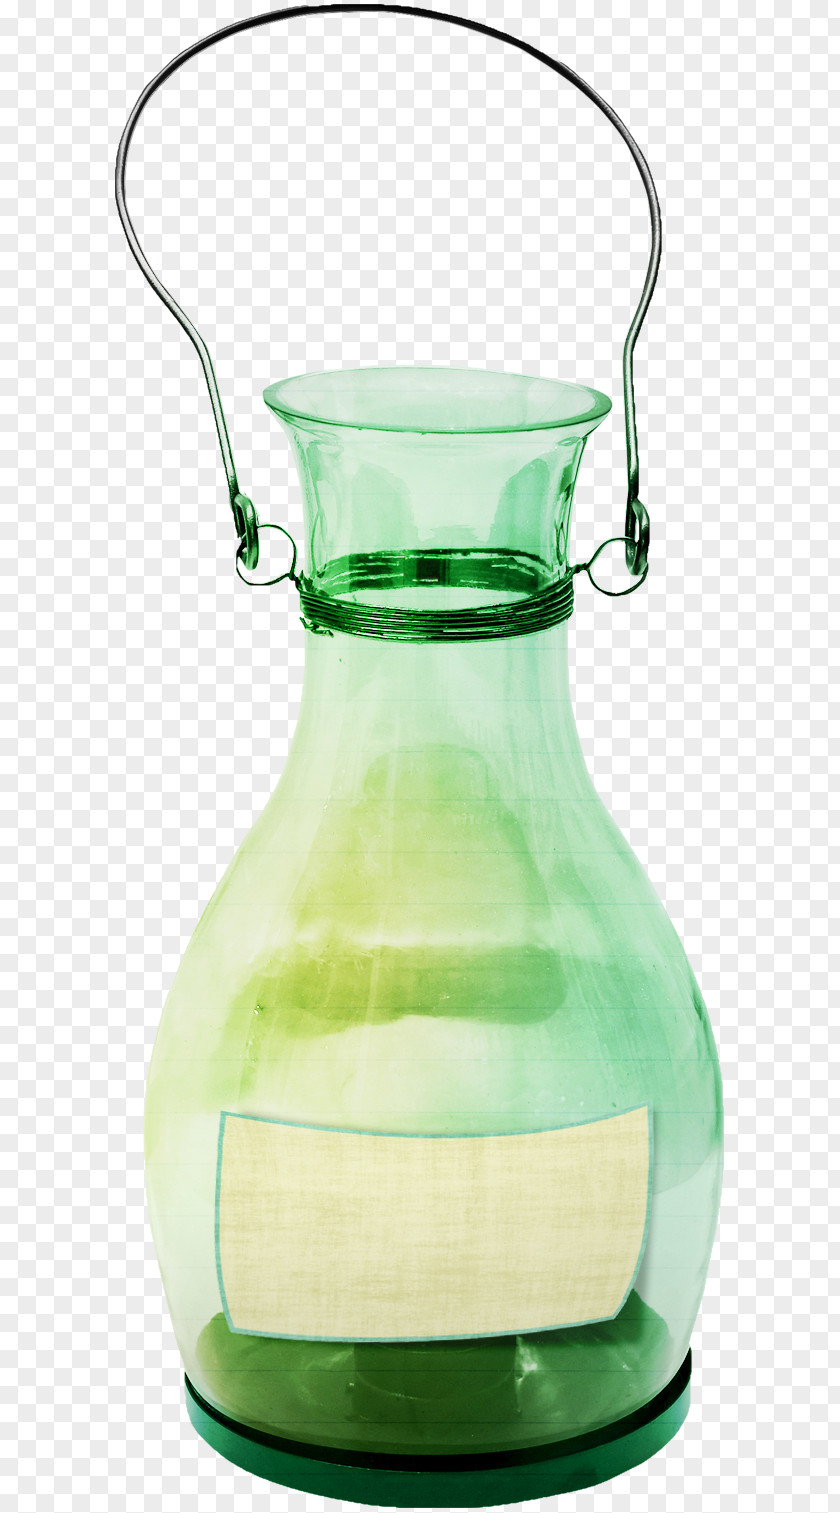 Green Transparent Glass Bottle Transparency And Translucency PNG